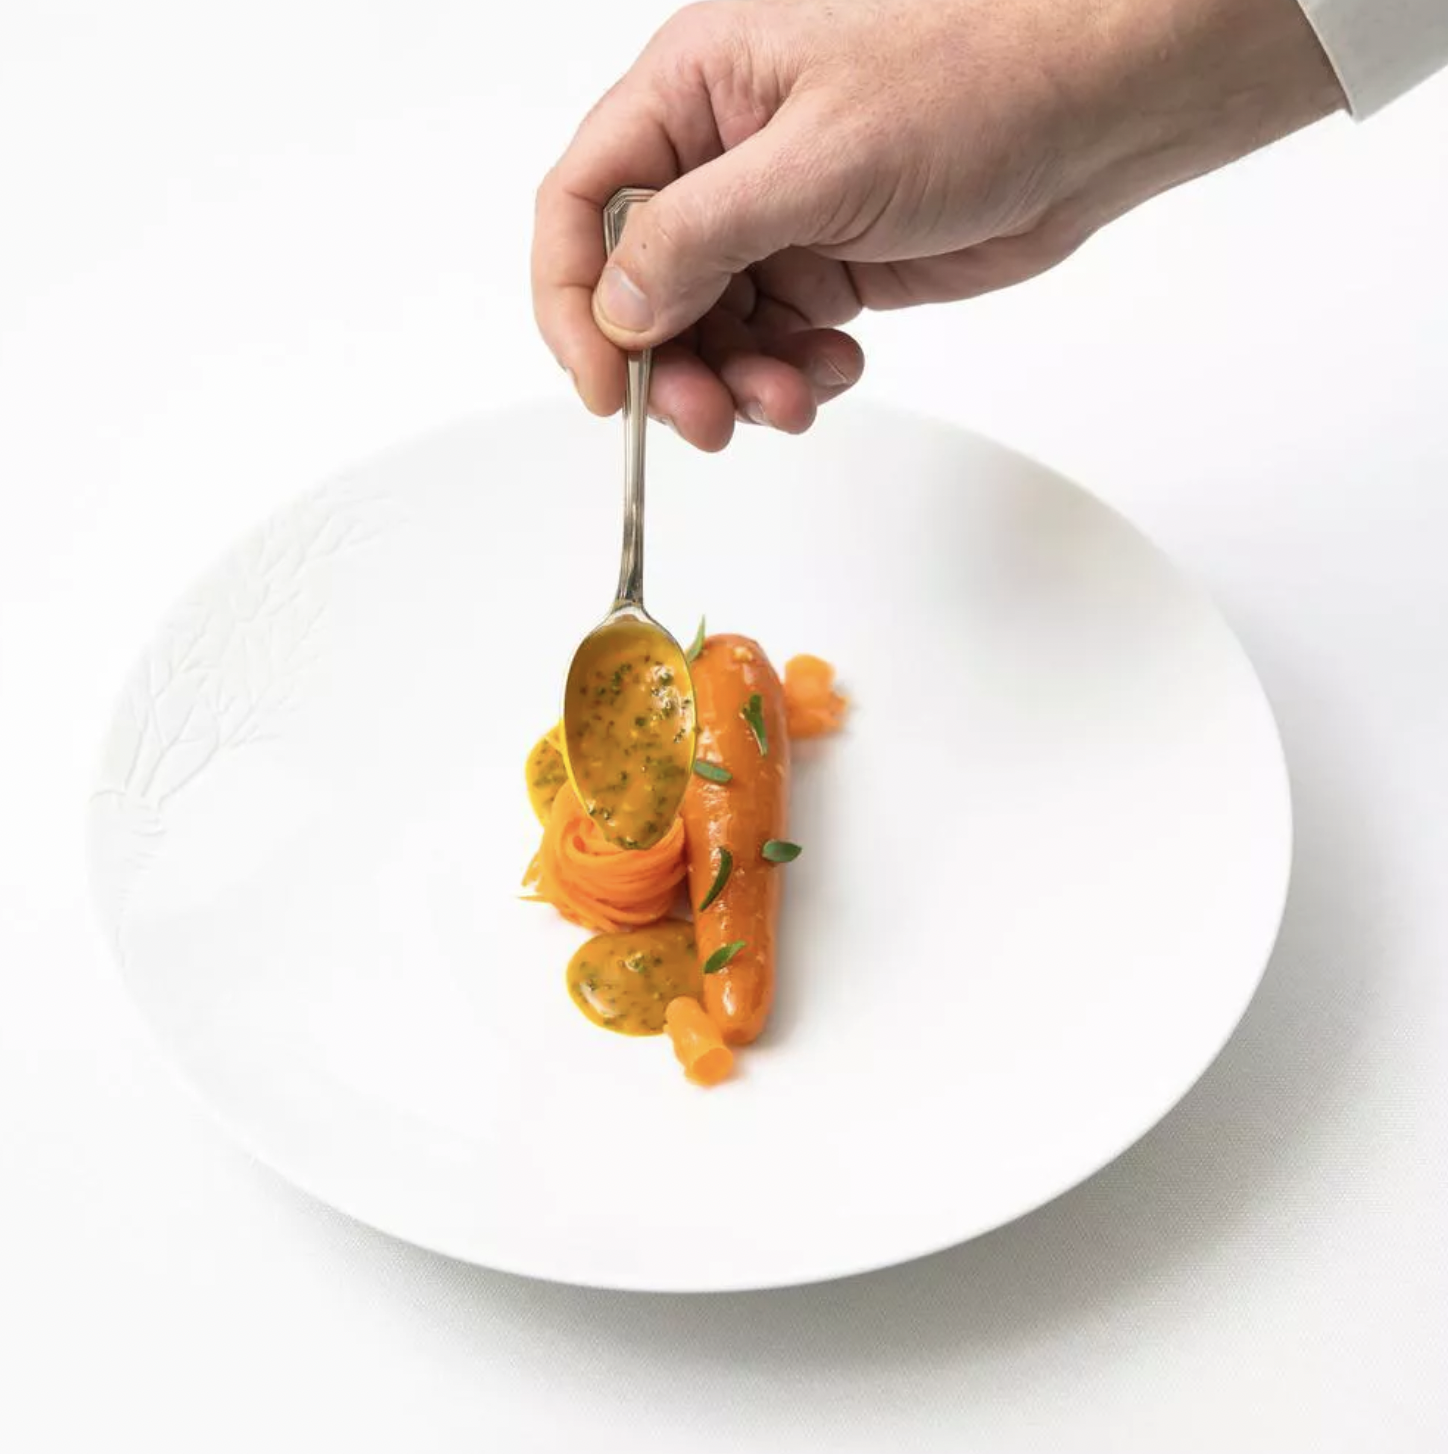 There is a new 3 Star in Paris: Chef Jérôme Banctel at Le Gabriel